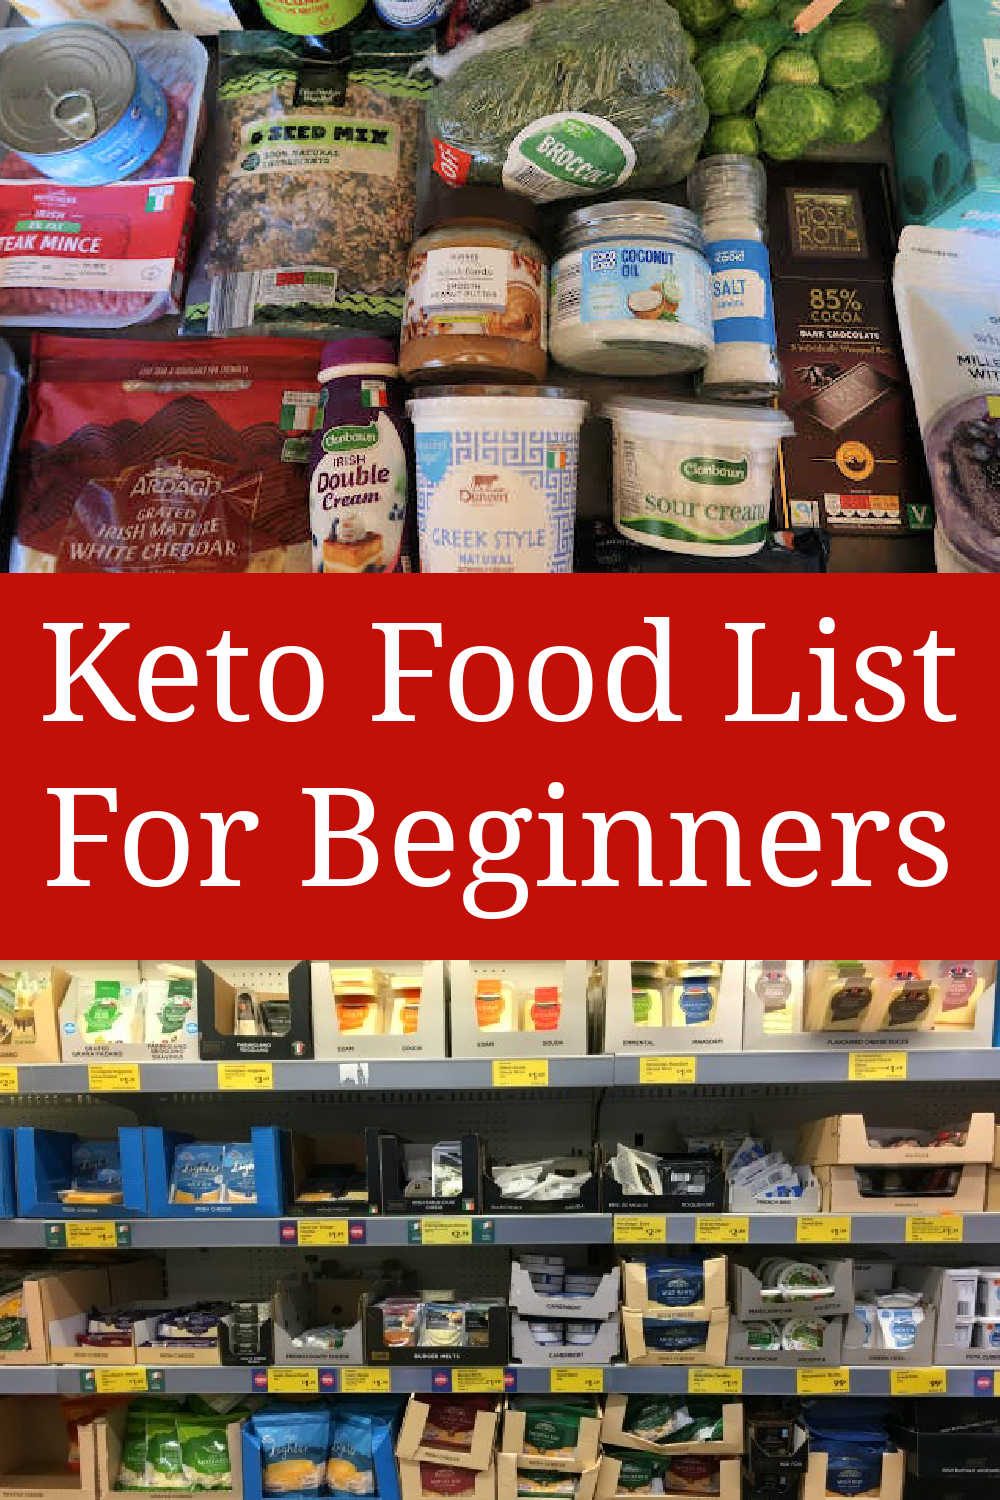 Keto Food List For Beginners - ultimate guide to the best low carb diet friendly foods to add to your grocery shopping list - with a video talking you through the food and easy meal ideas.